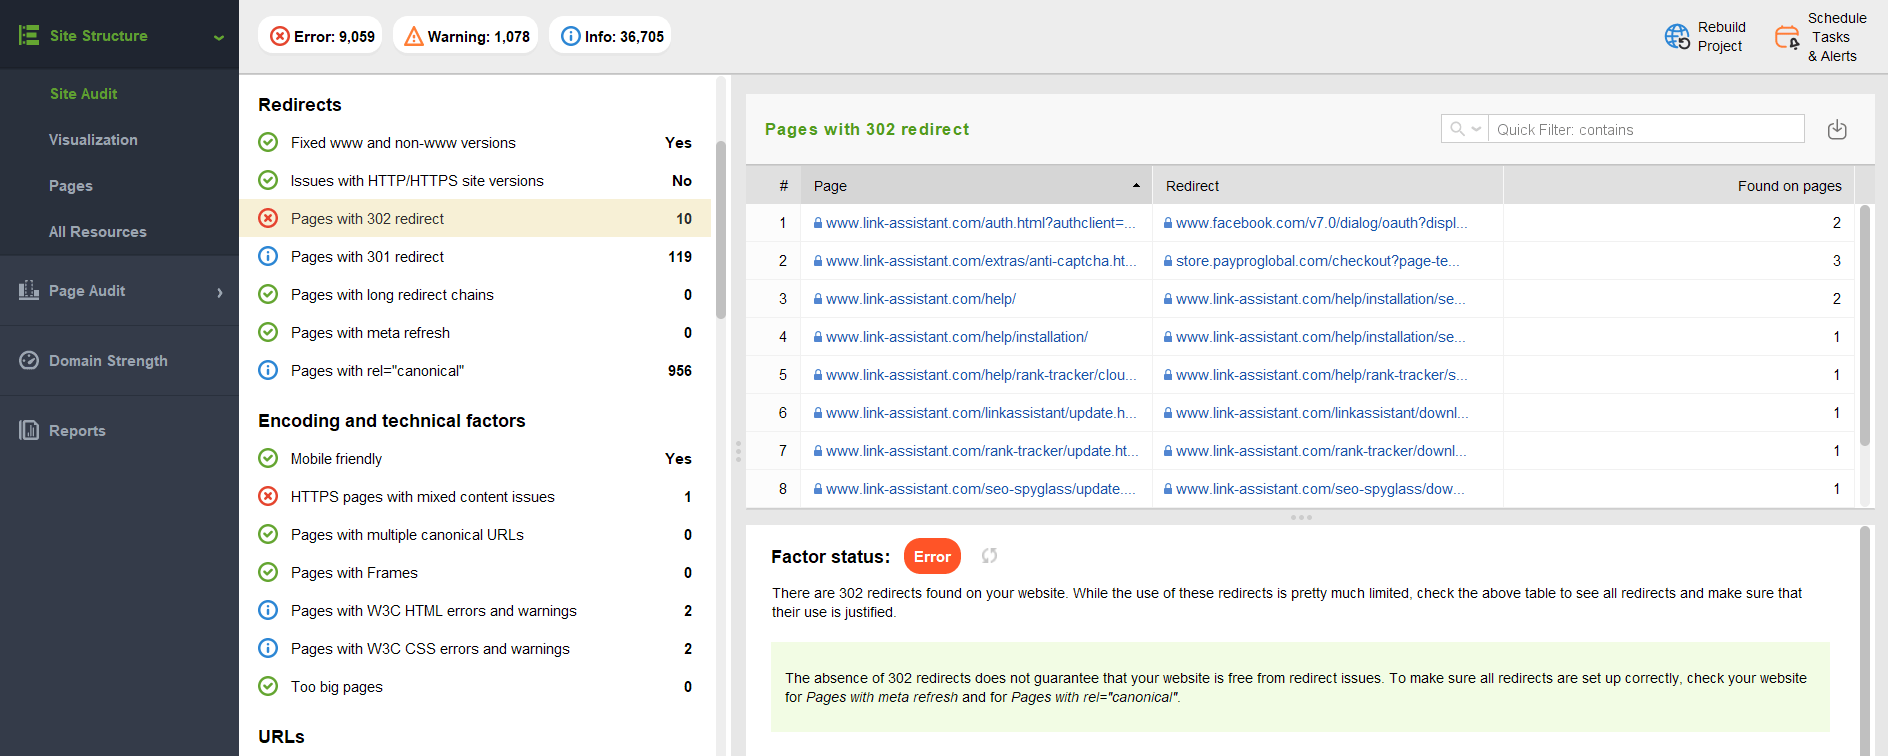 WebSite Auditor's dashboard with the Redirects section open